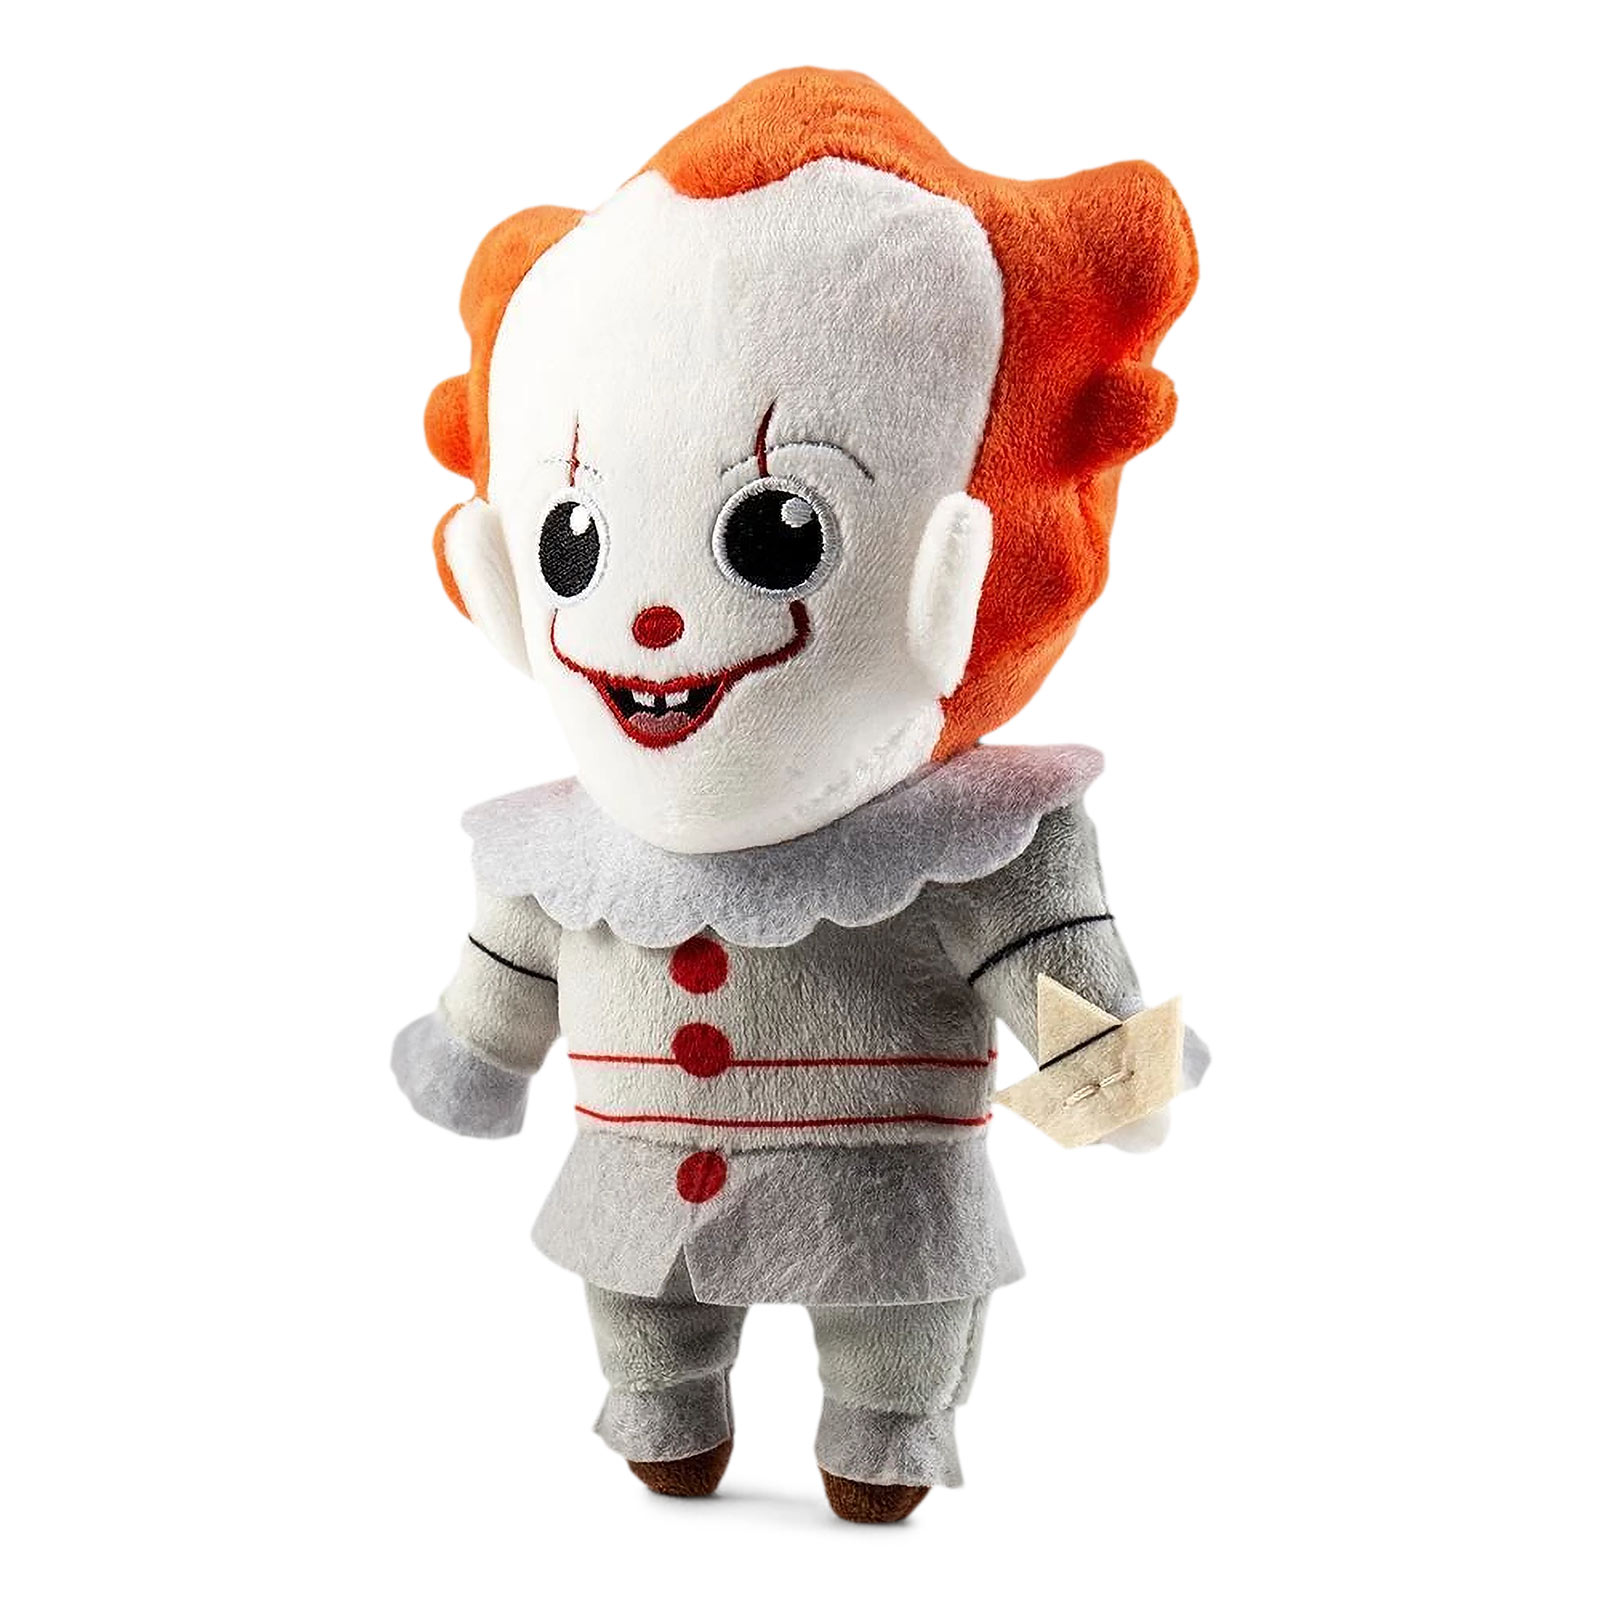 Stephen King's IT - Pennywise Phunny Plush Figure 22 cm